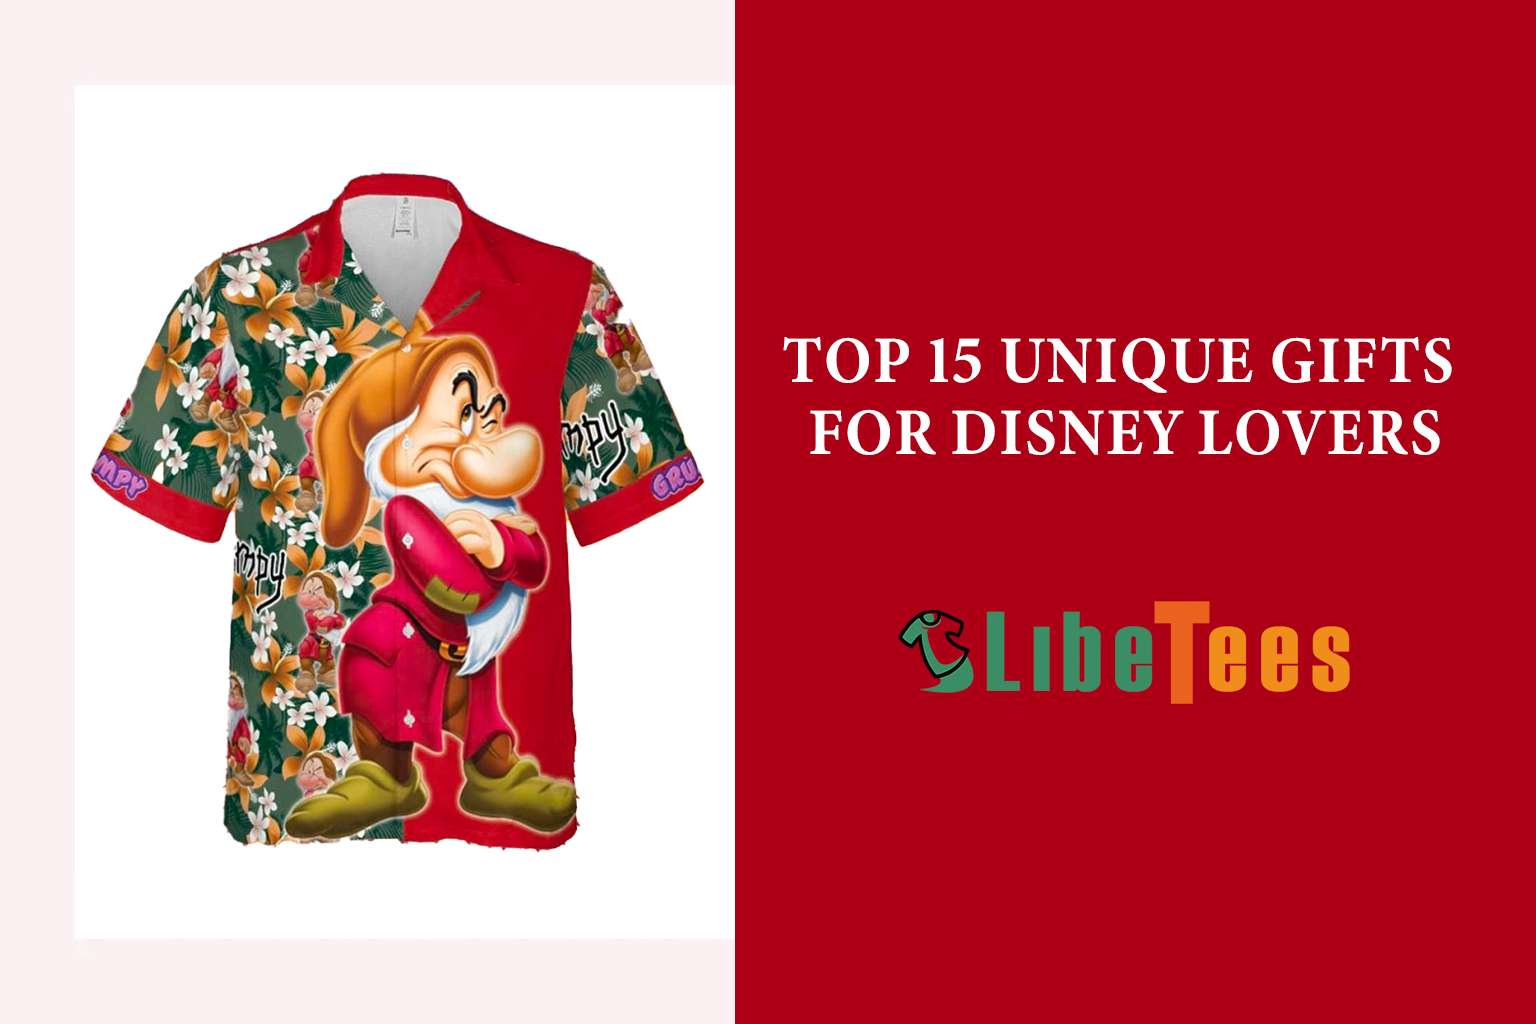 Top 15 Unique Gifts for Disney Lovers